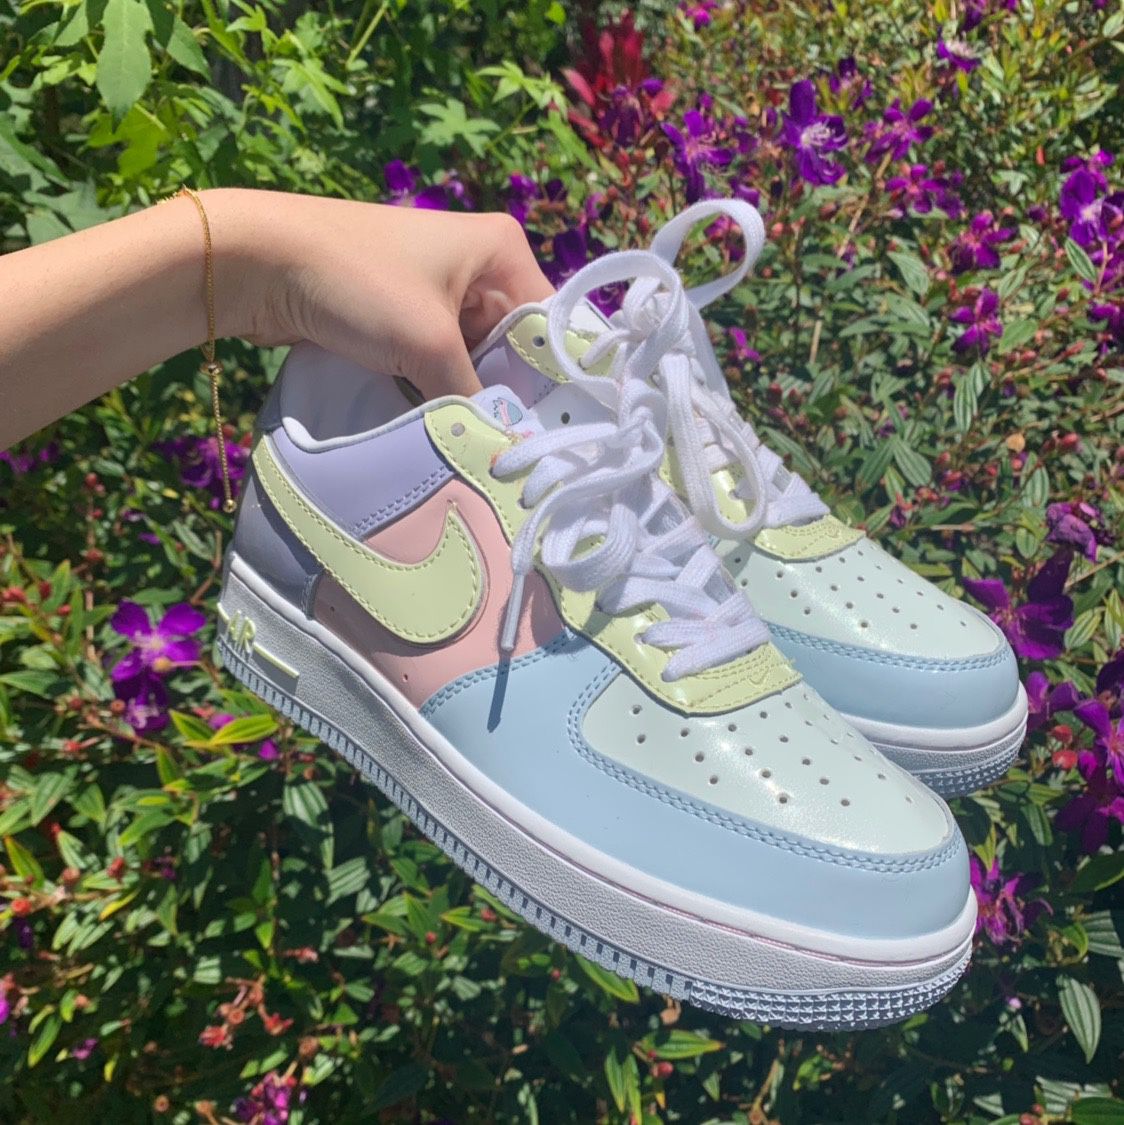 pauze Darts Moreel onderwijs DEADSTOCK Nike Air Force 1 Easter Egg Edition for Sale in Winter Springs,  FL - OfferUp